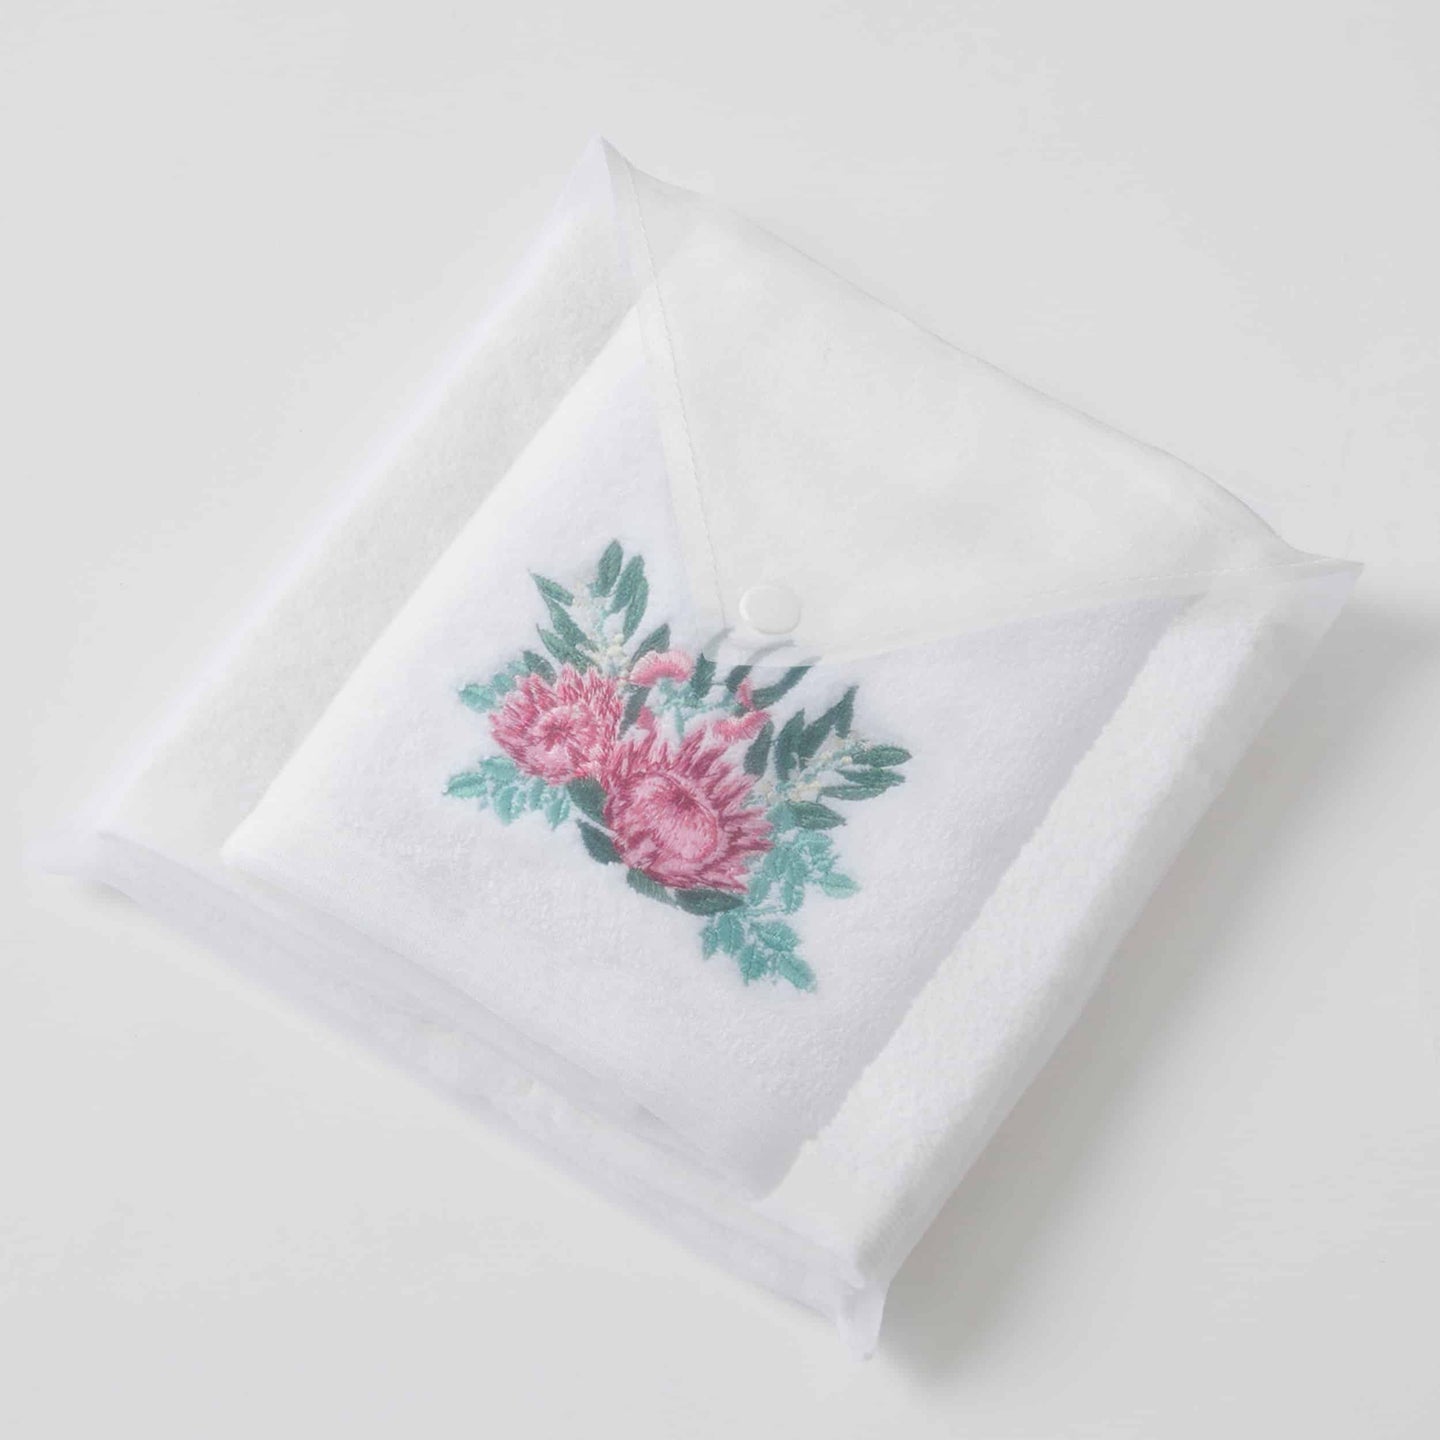 Protea Hand Towel & Face Washer In Organza Bag